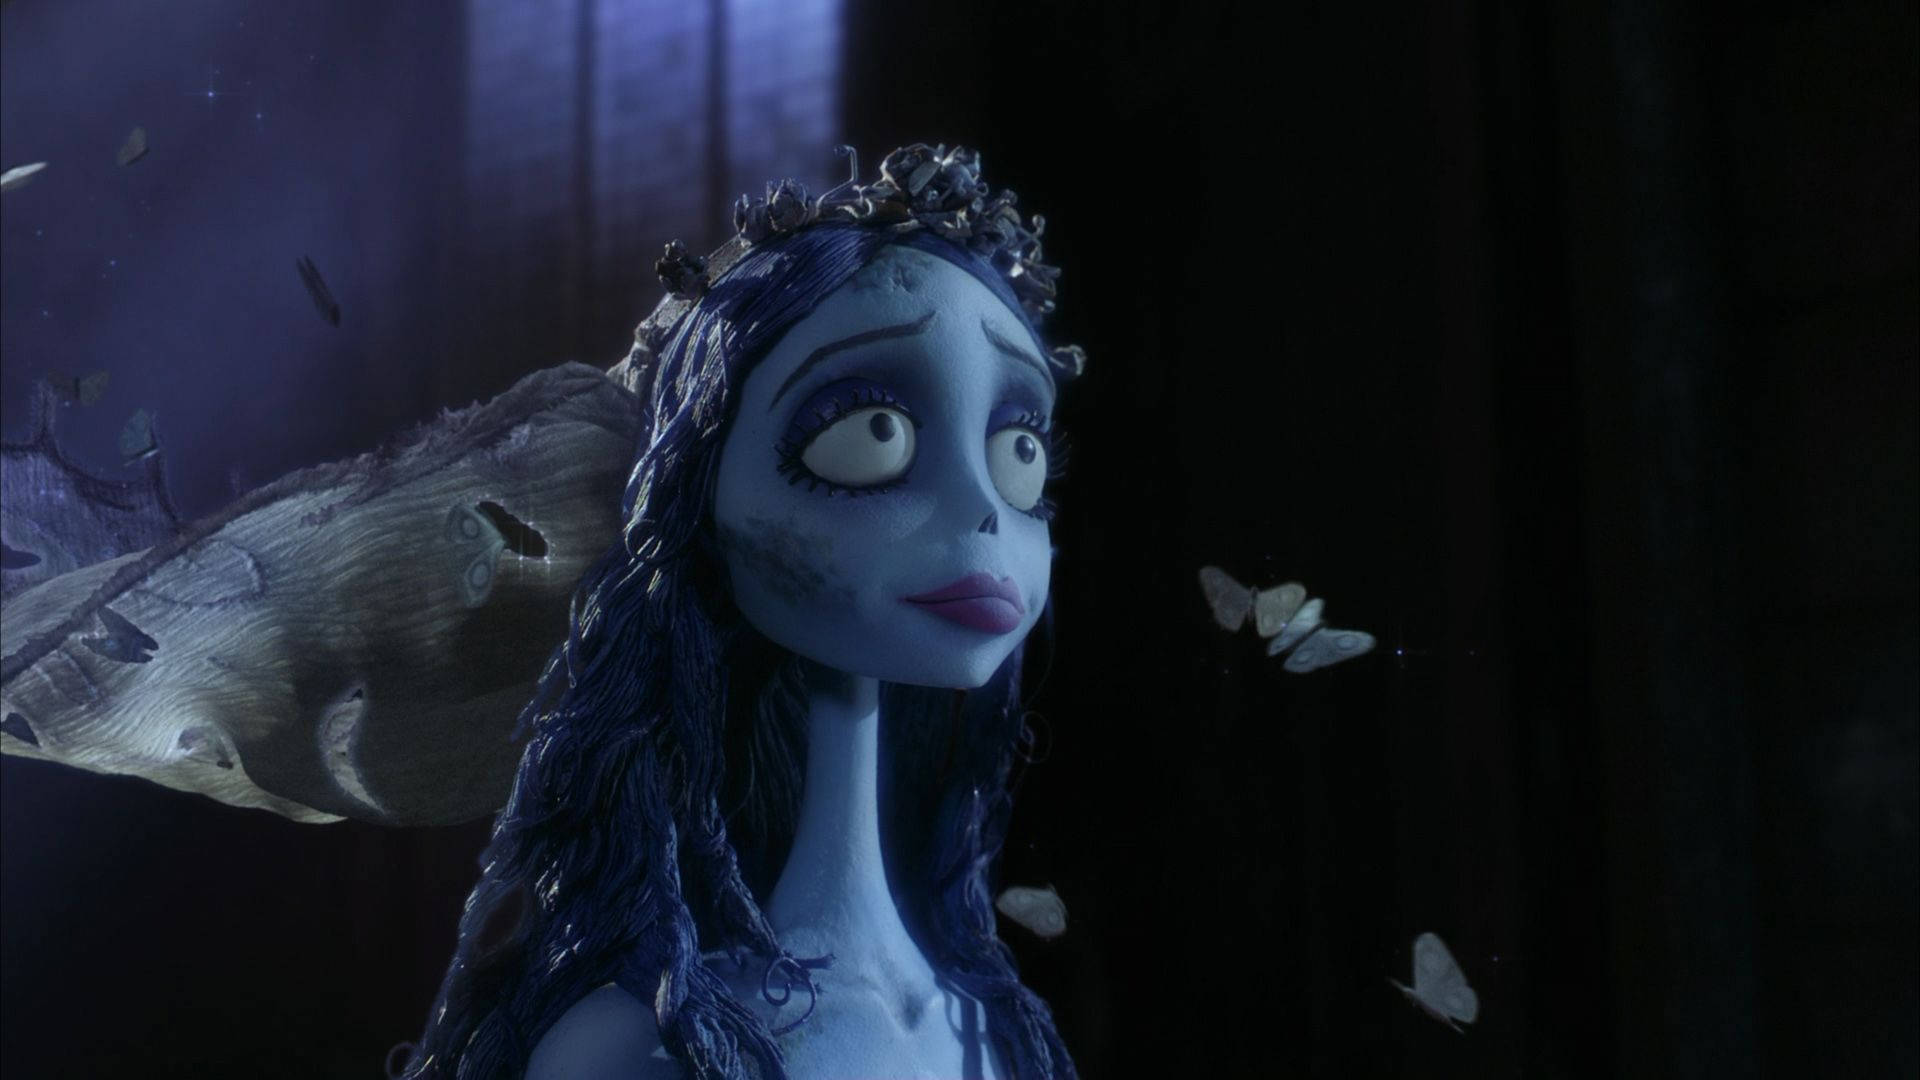 Emily corpse bride wallpaper by KeelyInc  Download on ZEDGE  b443